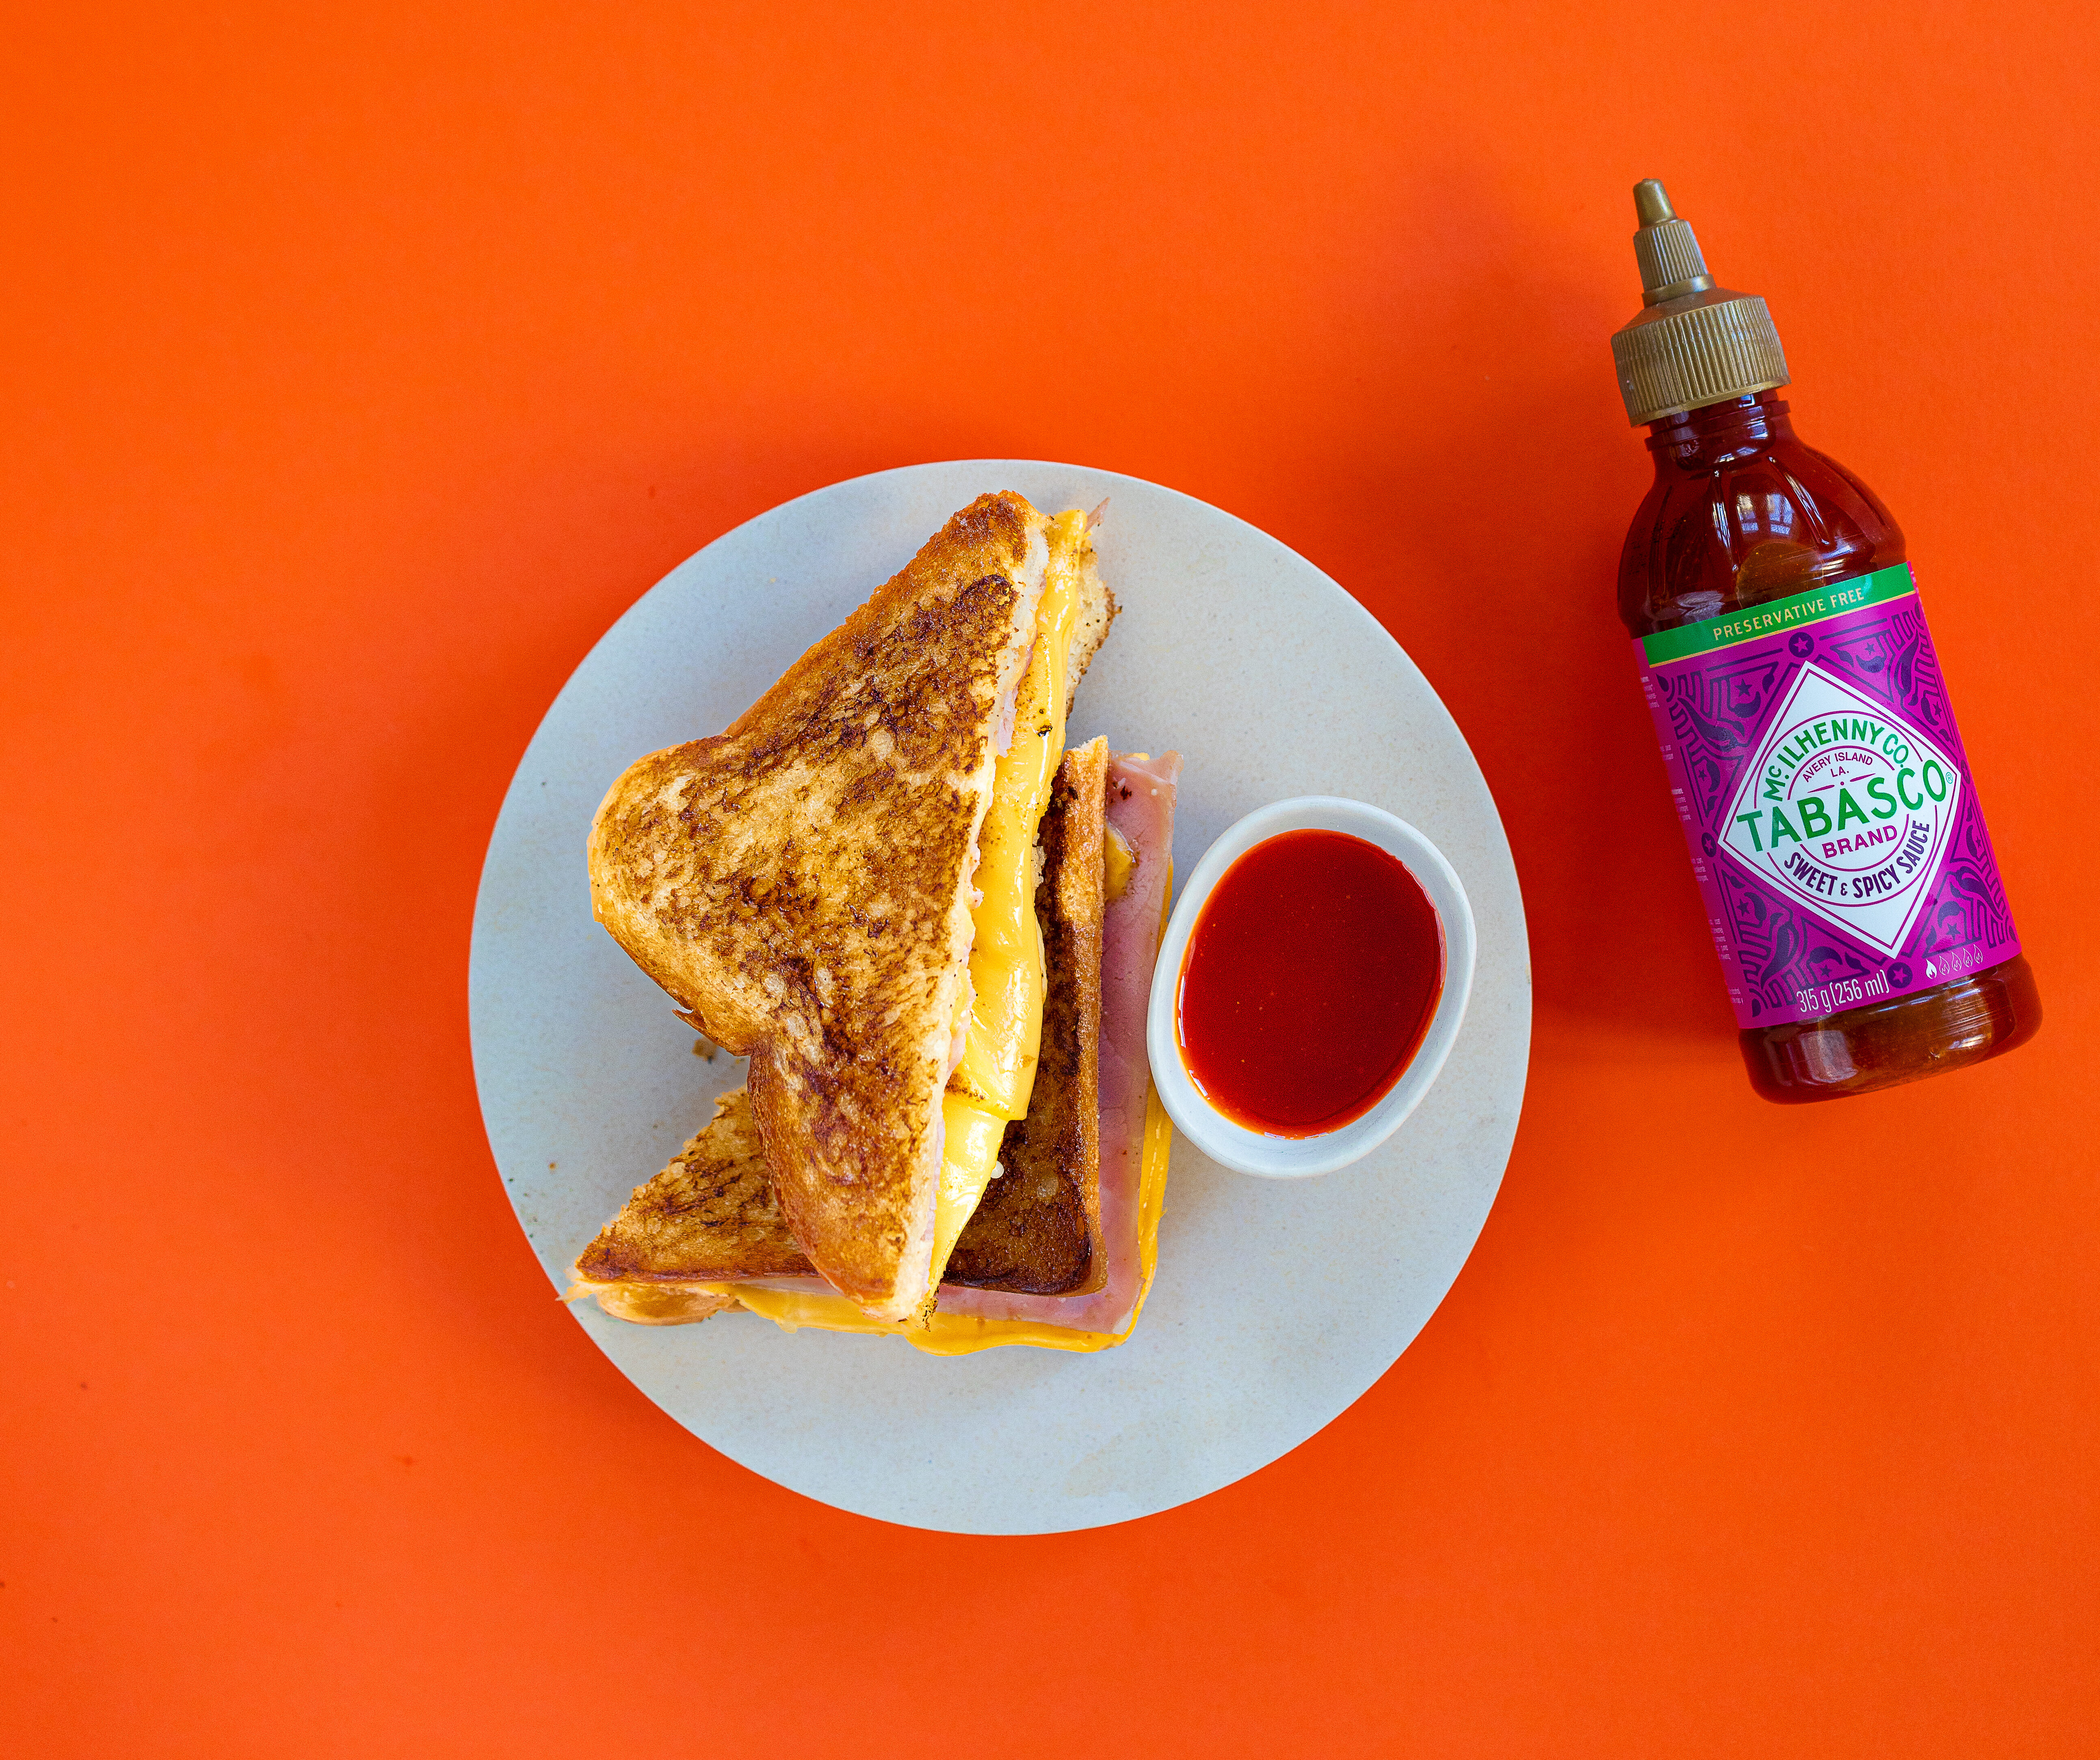 Miso Ham Cheese Sandwich with Sweet and Spicy Sauce